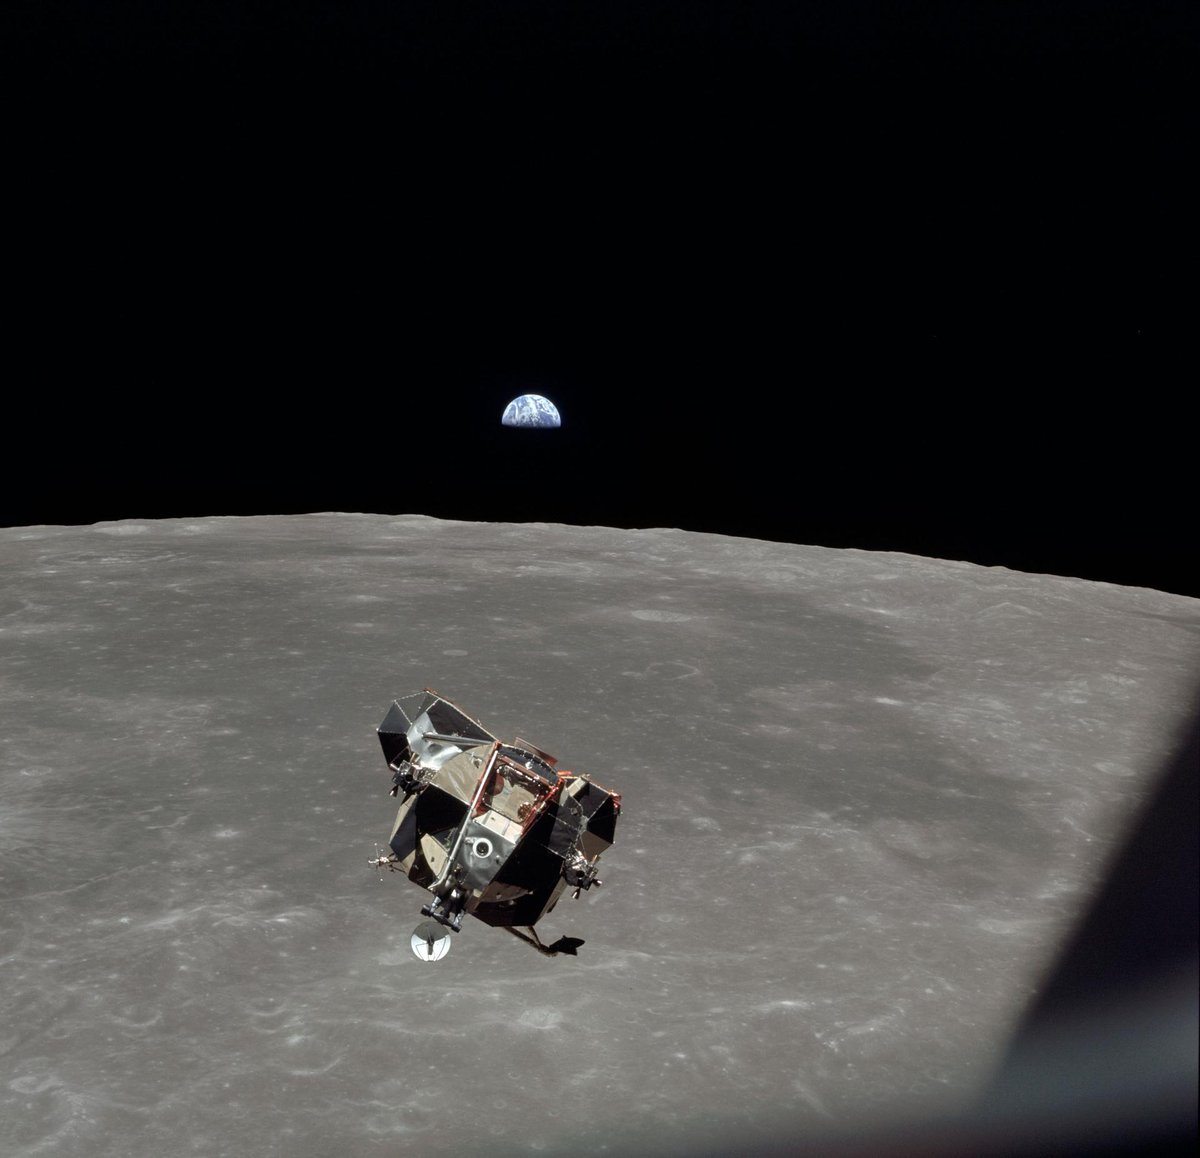 Earth visible in the background as part of the Apollo 11 mission 